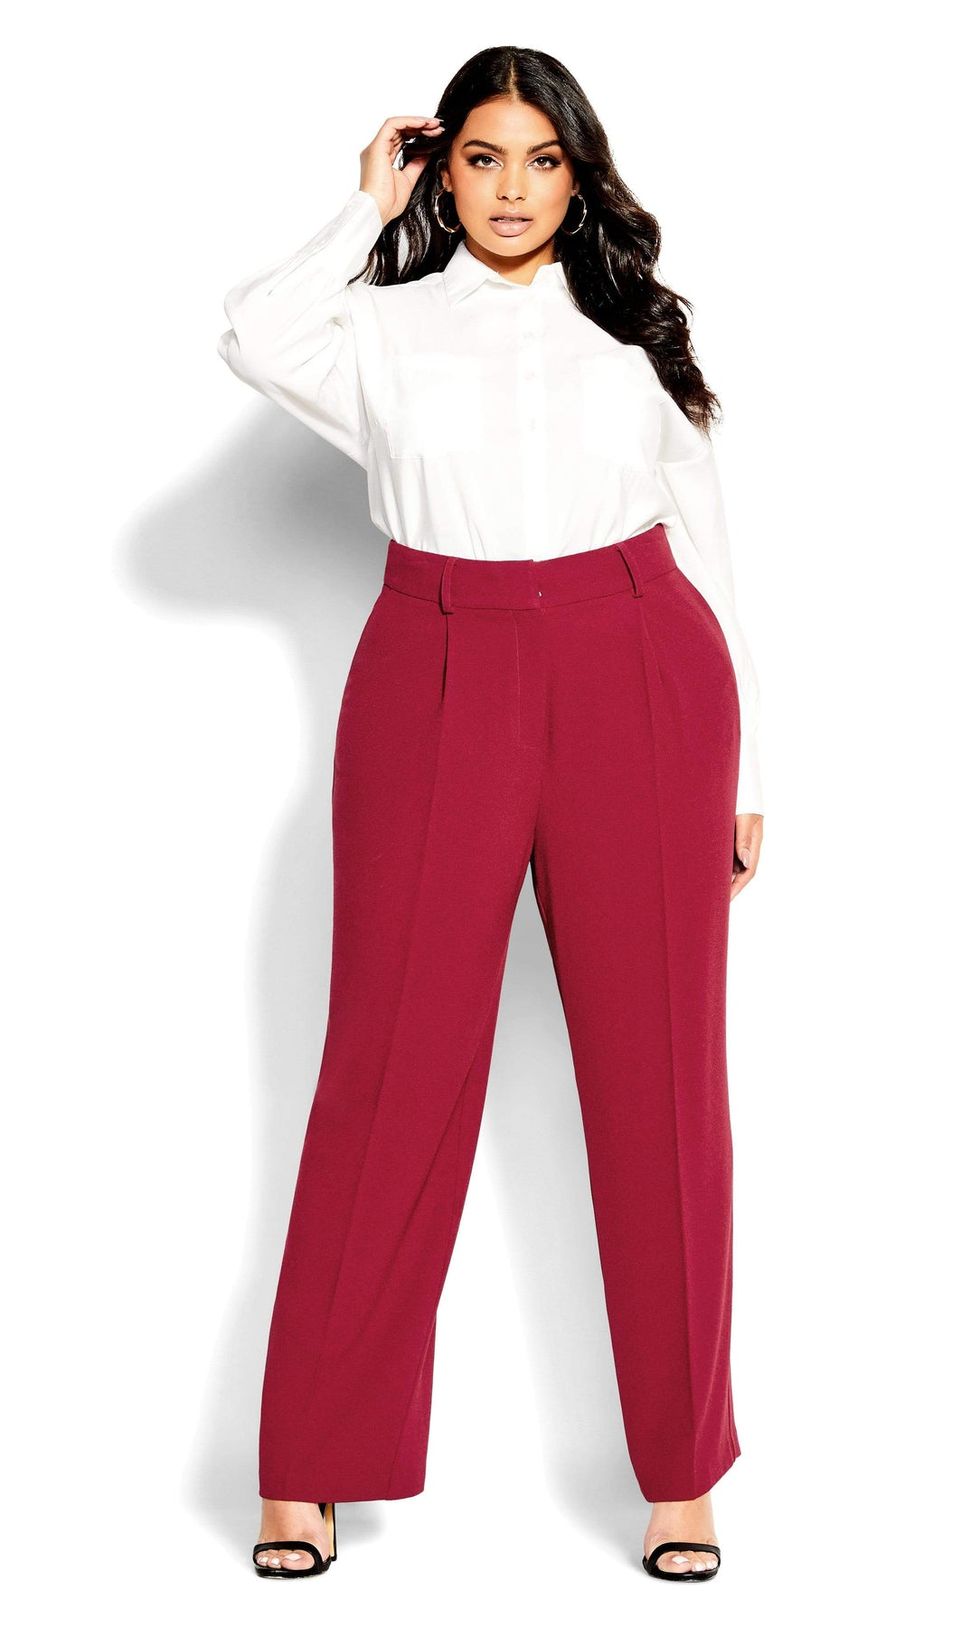 What to Wear With Red Pants Female